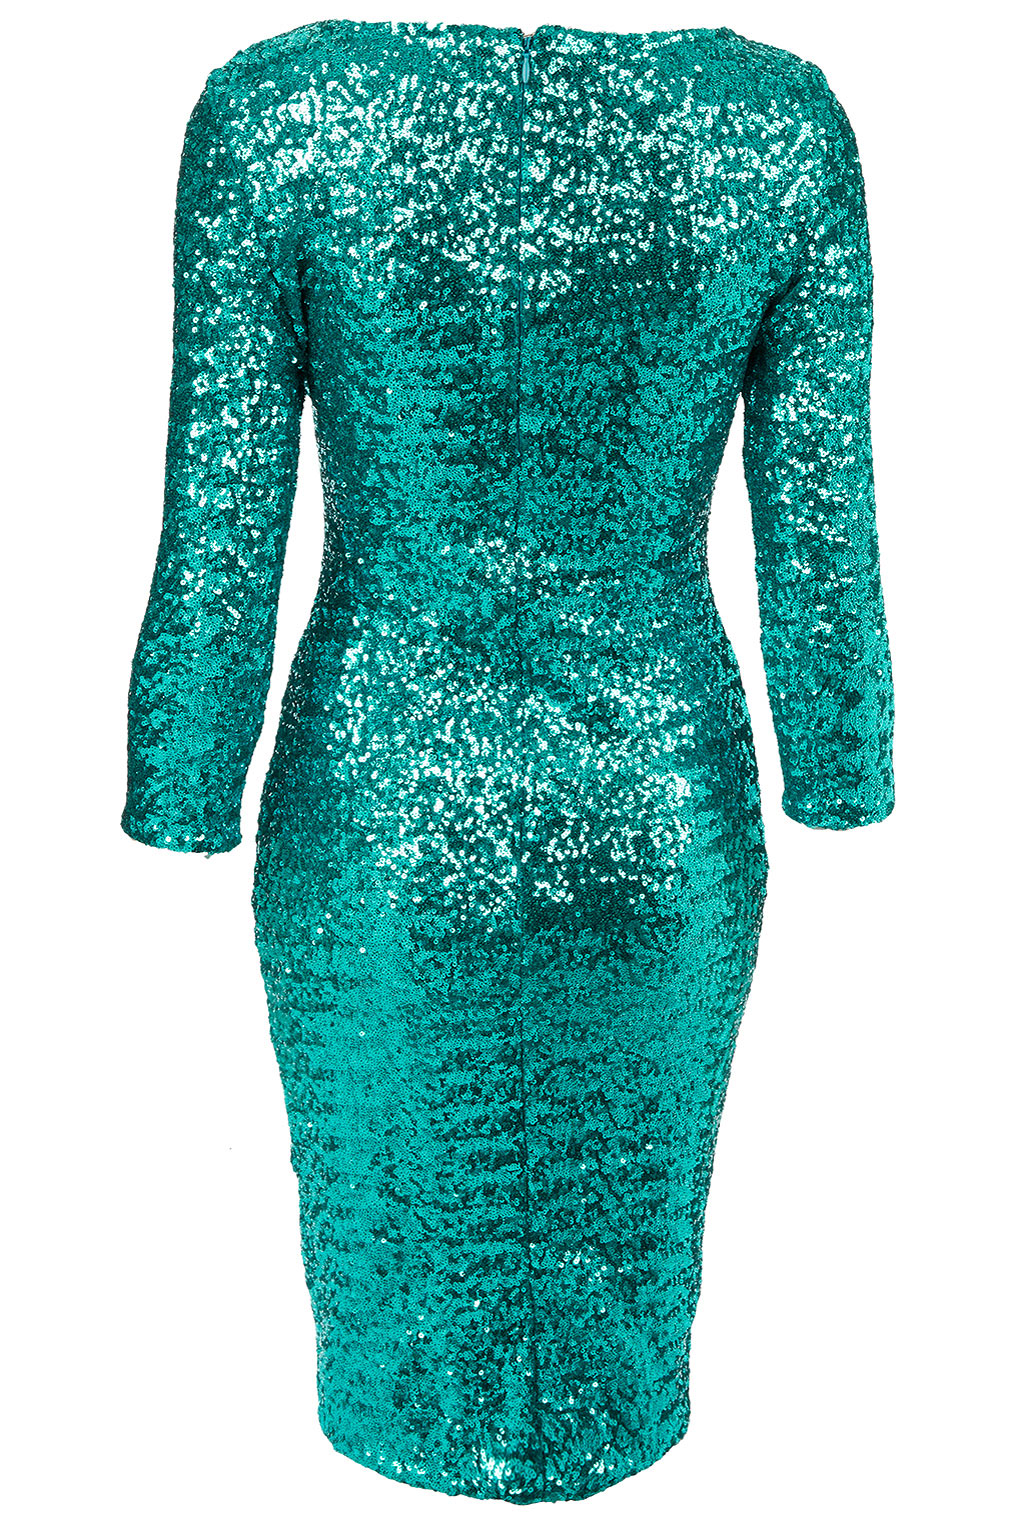 Holidays Special Party Dresses Guide: DISCO SEQUIN MIDI DRESS ...